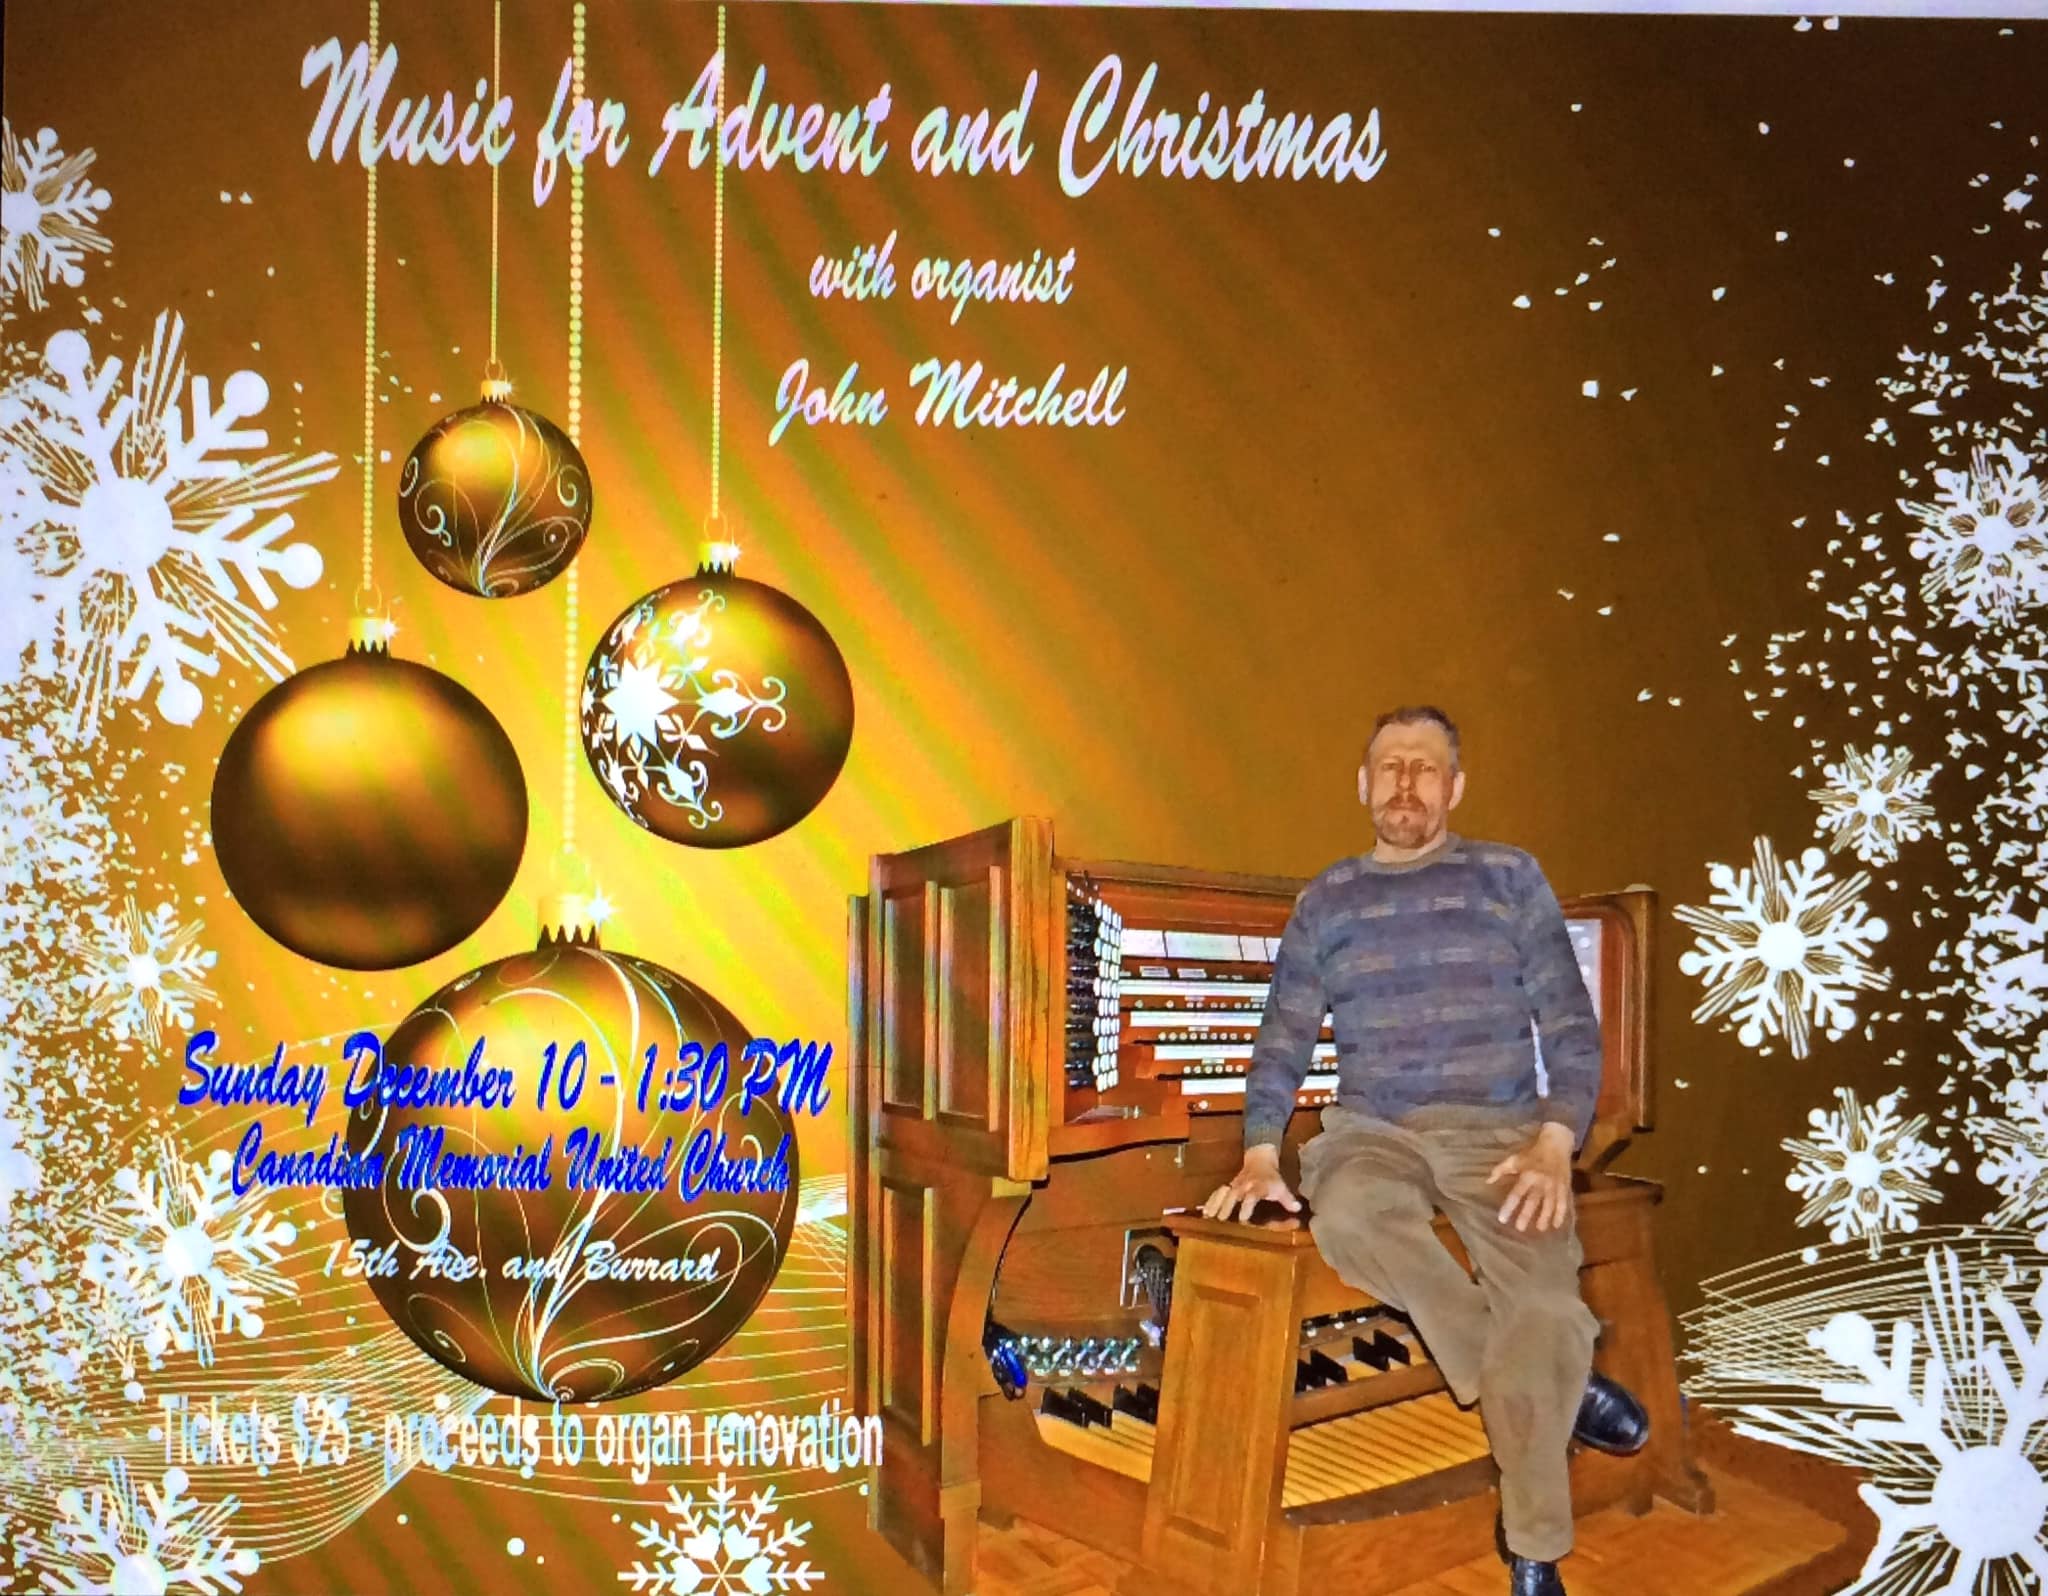 Advent and Christmas Organ Recital with John Mitchell @ Canadian Memorial United Church